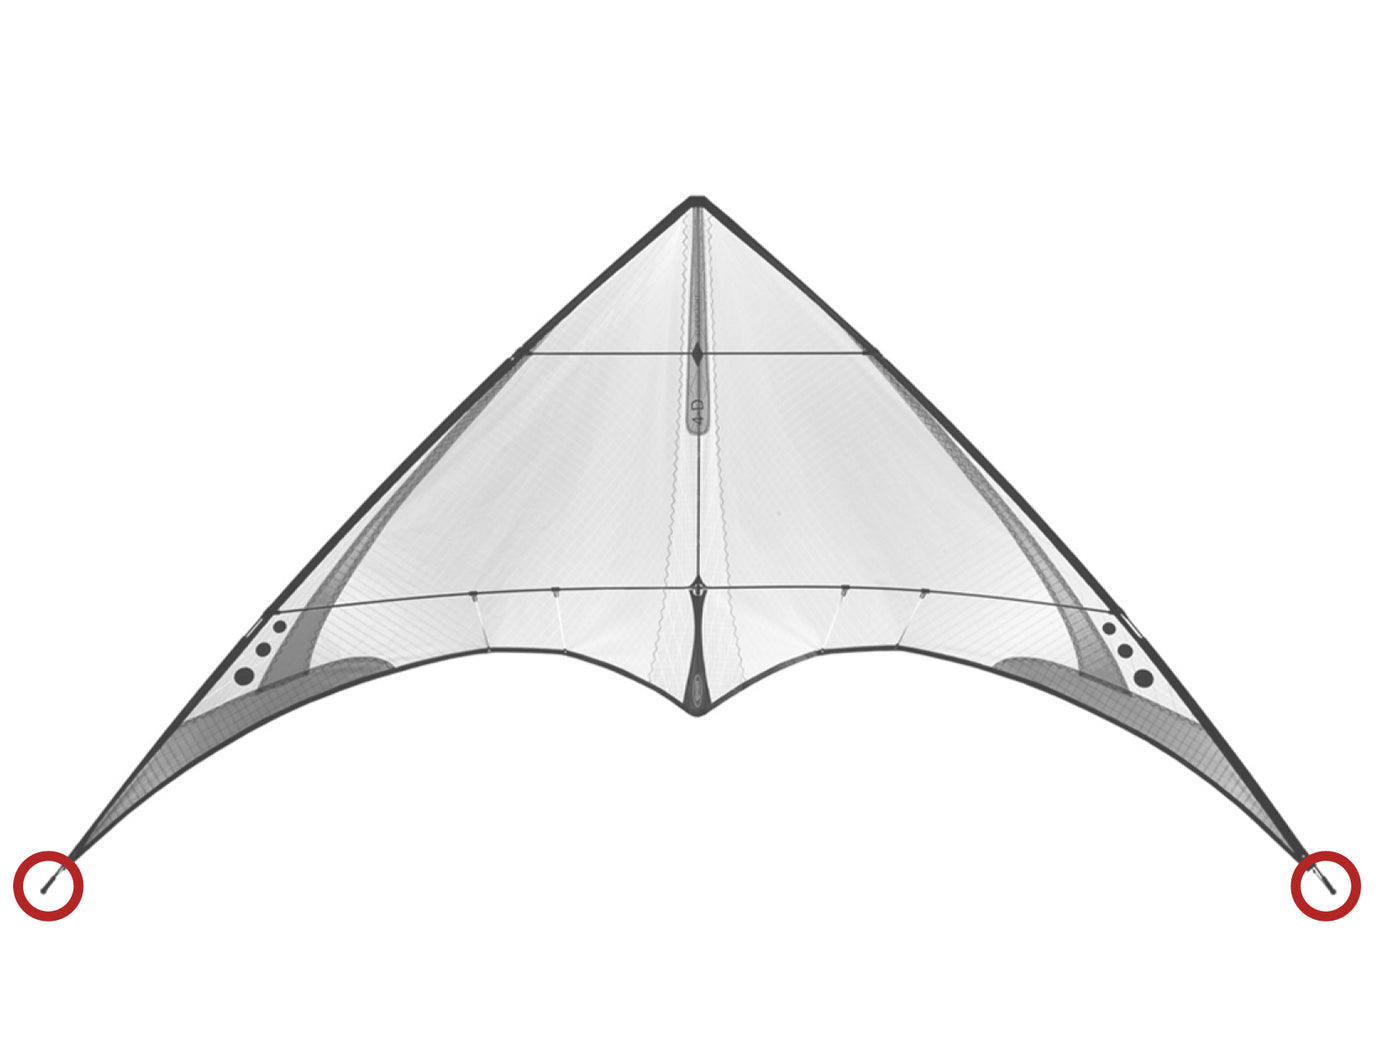 Diagram showing location of the 4-D Wingtip Nock on the kite.